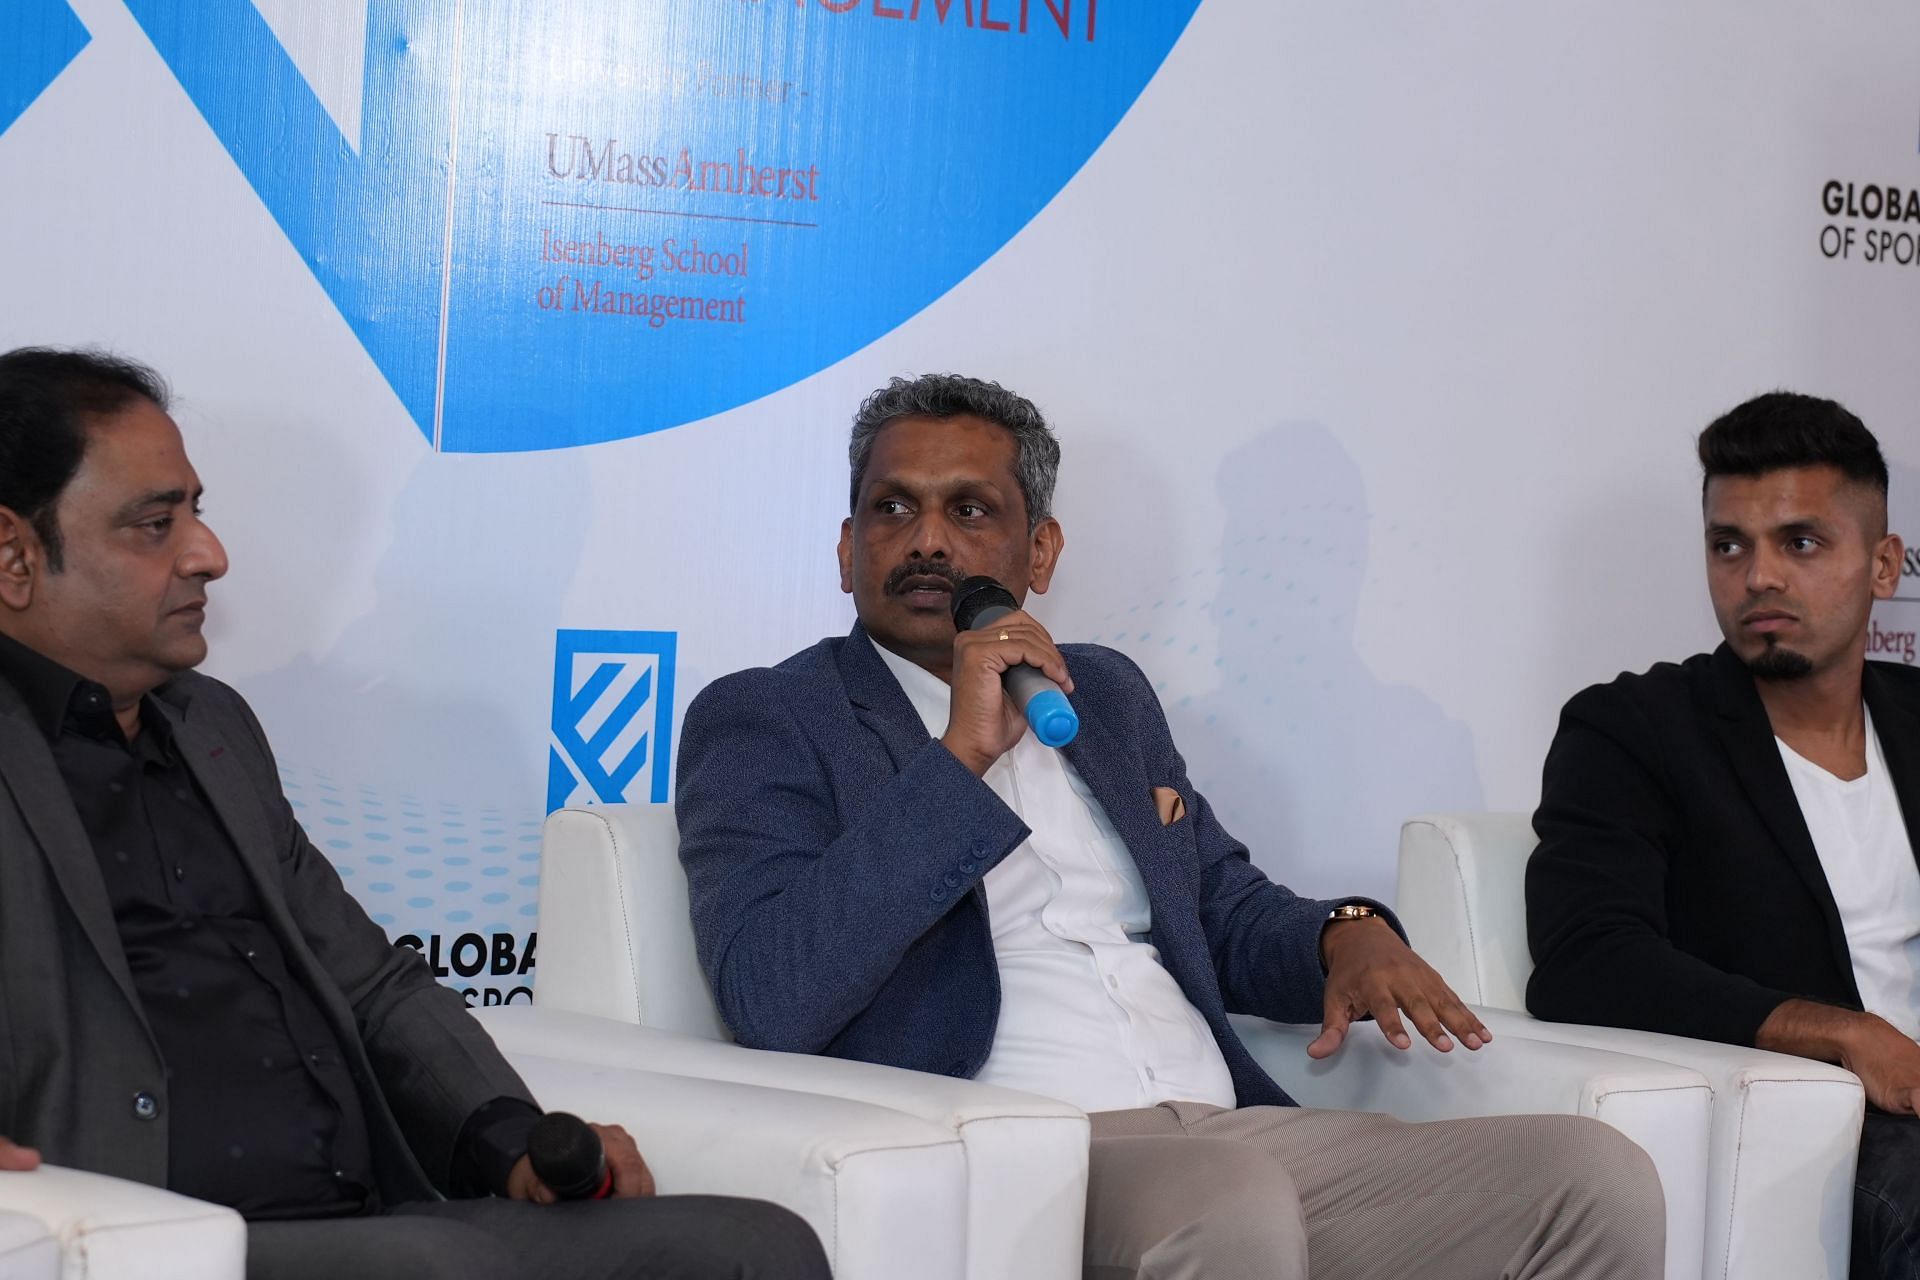 Visionary leaders unite as Dr. Shaji Prabhakaran and the panel inspire the future of sports management